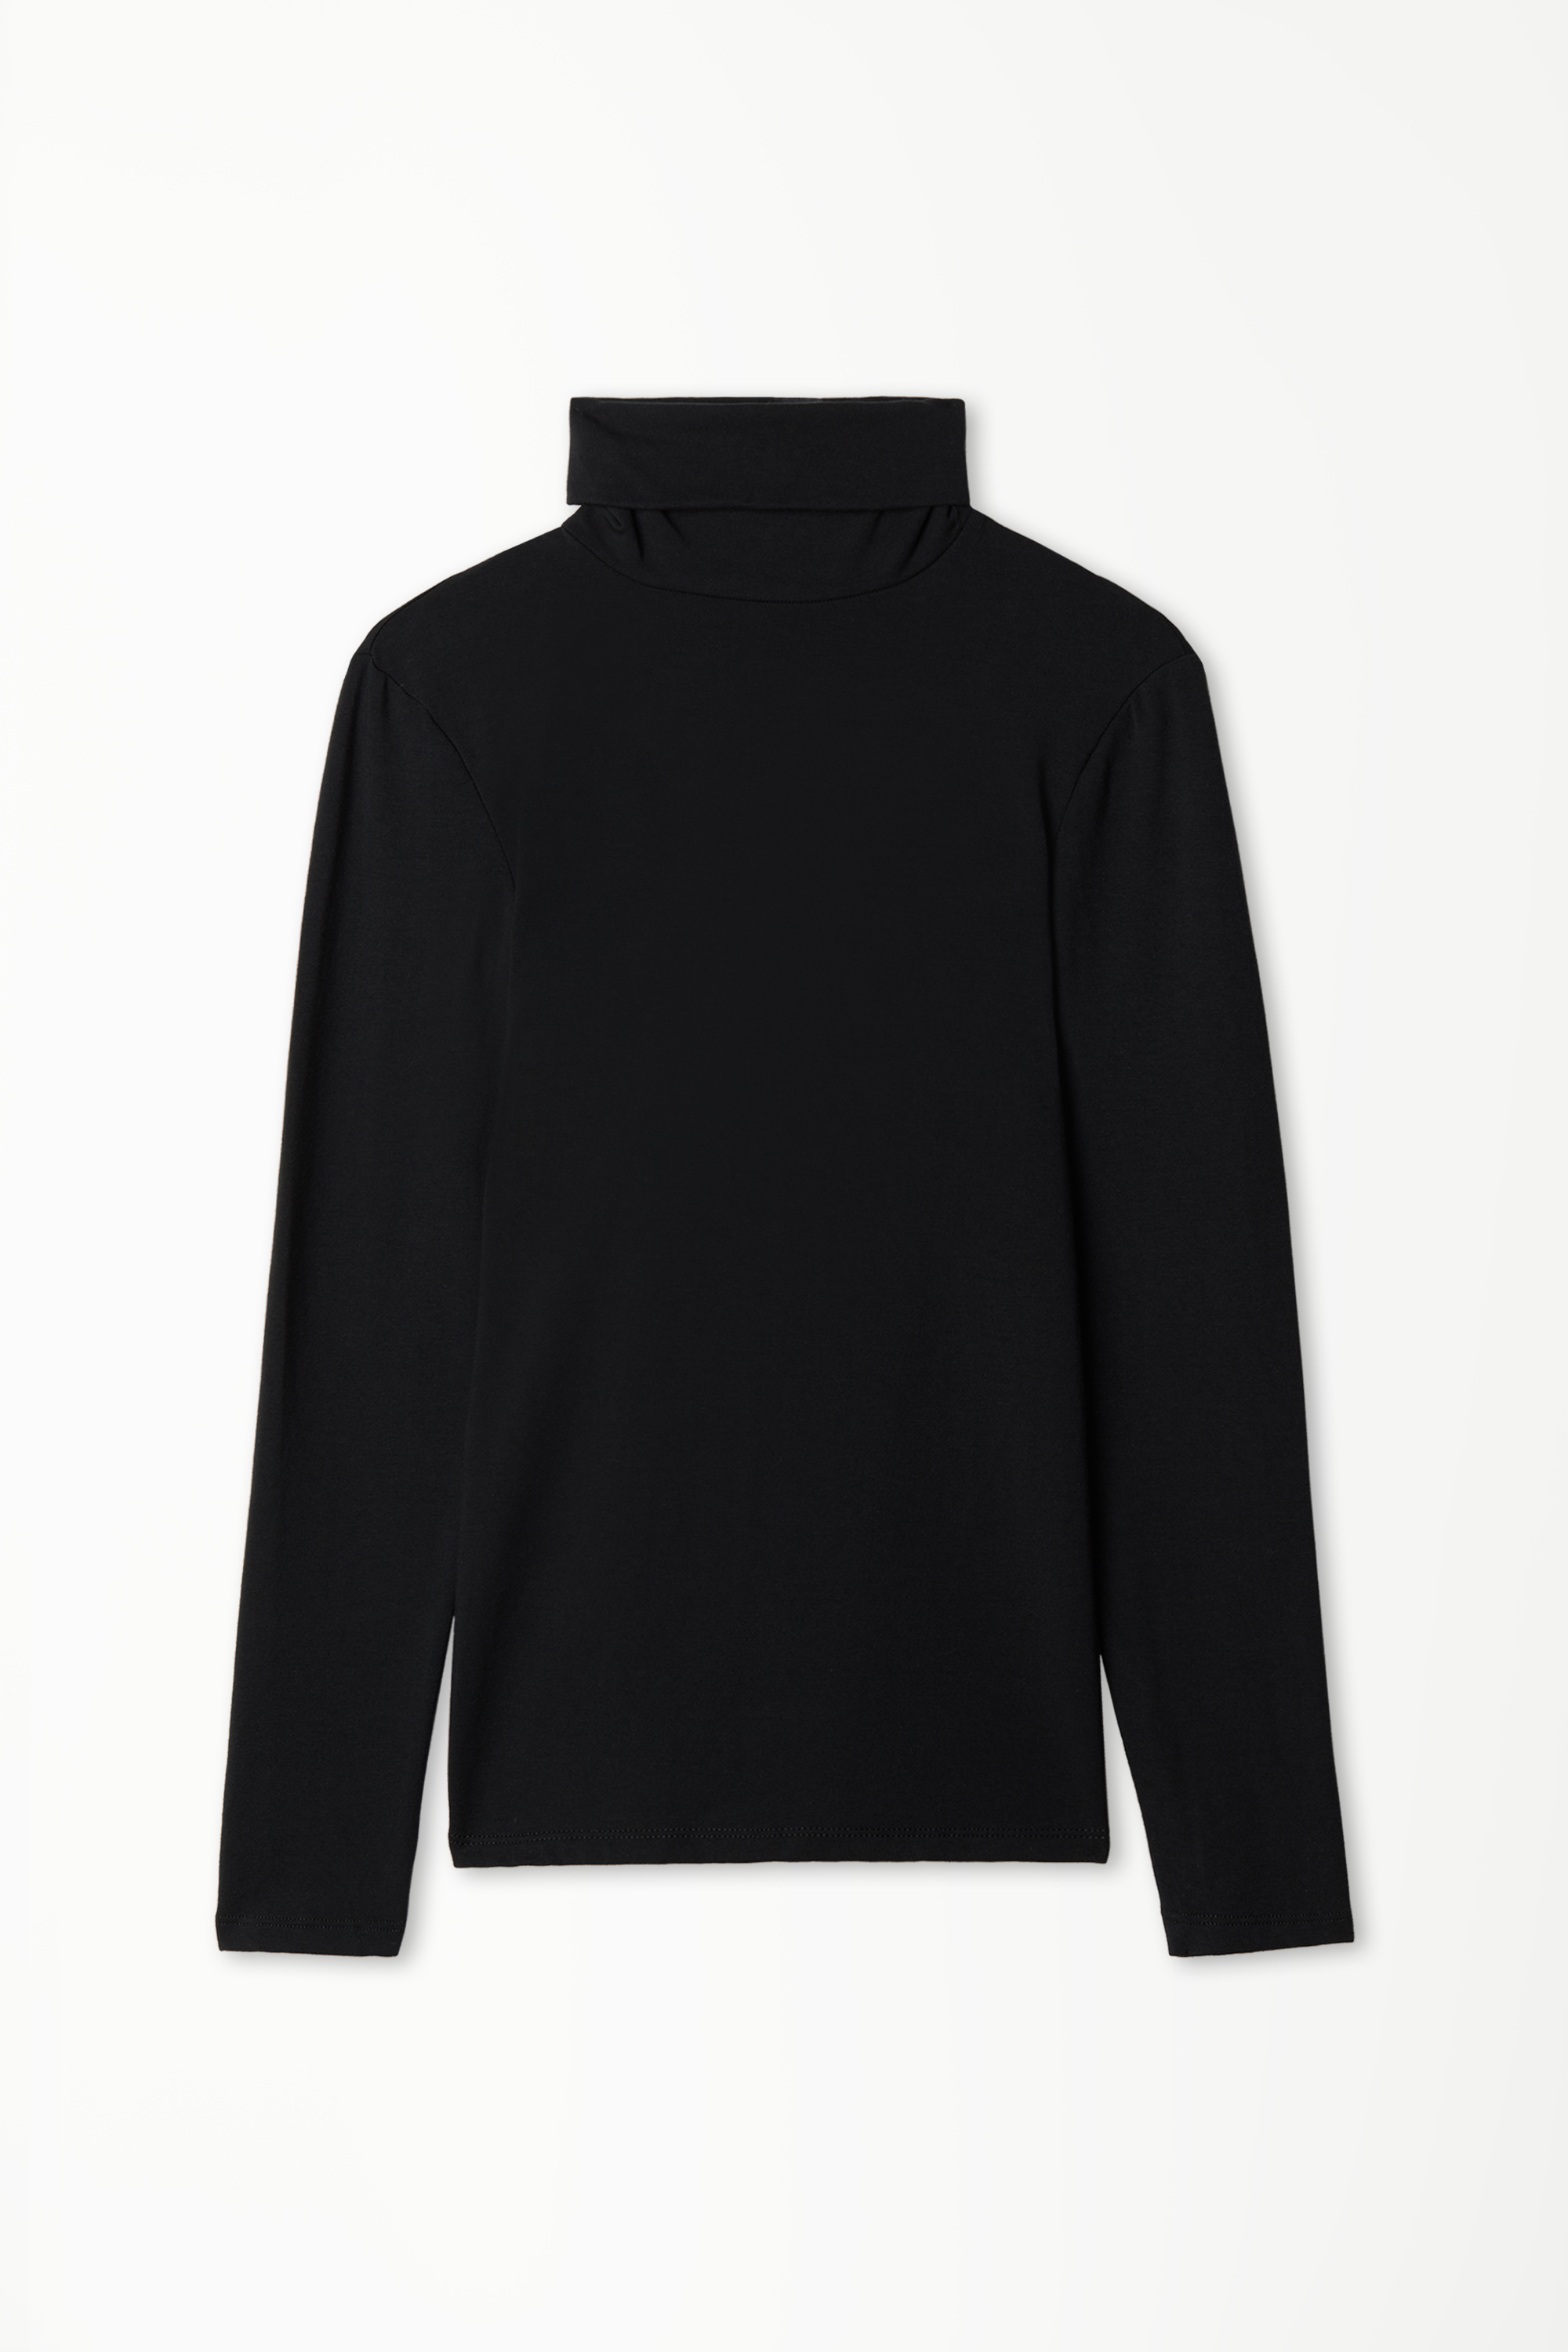 Cotton and Thermal Modal Polo Neck Top